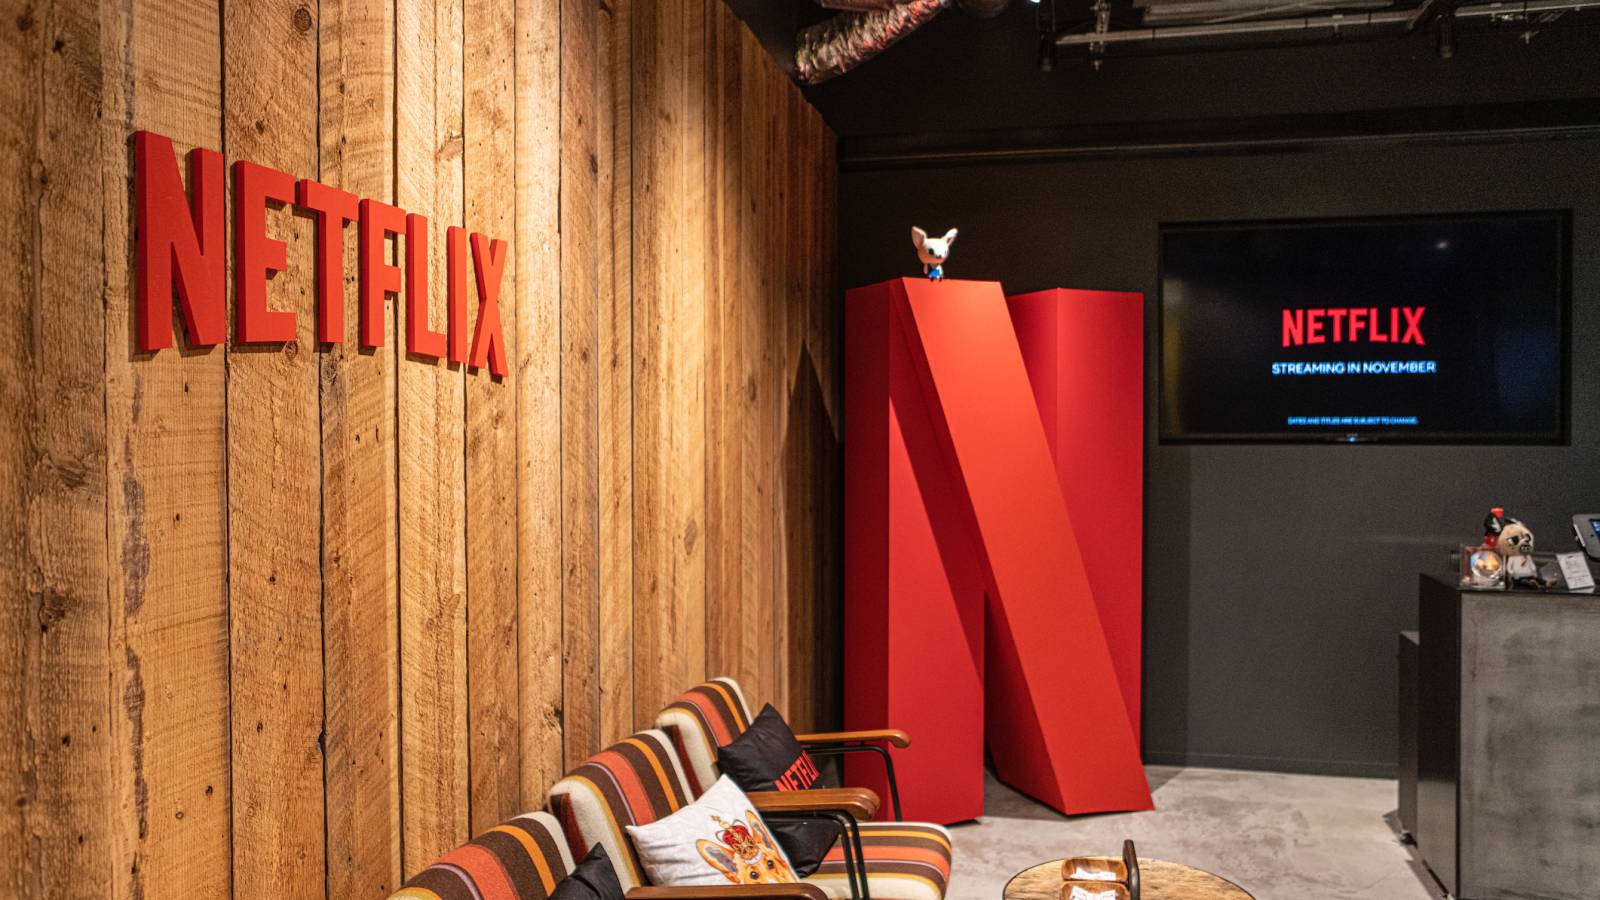 What Companies Does Netflix Own? | The Org